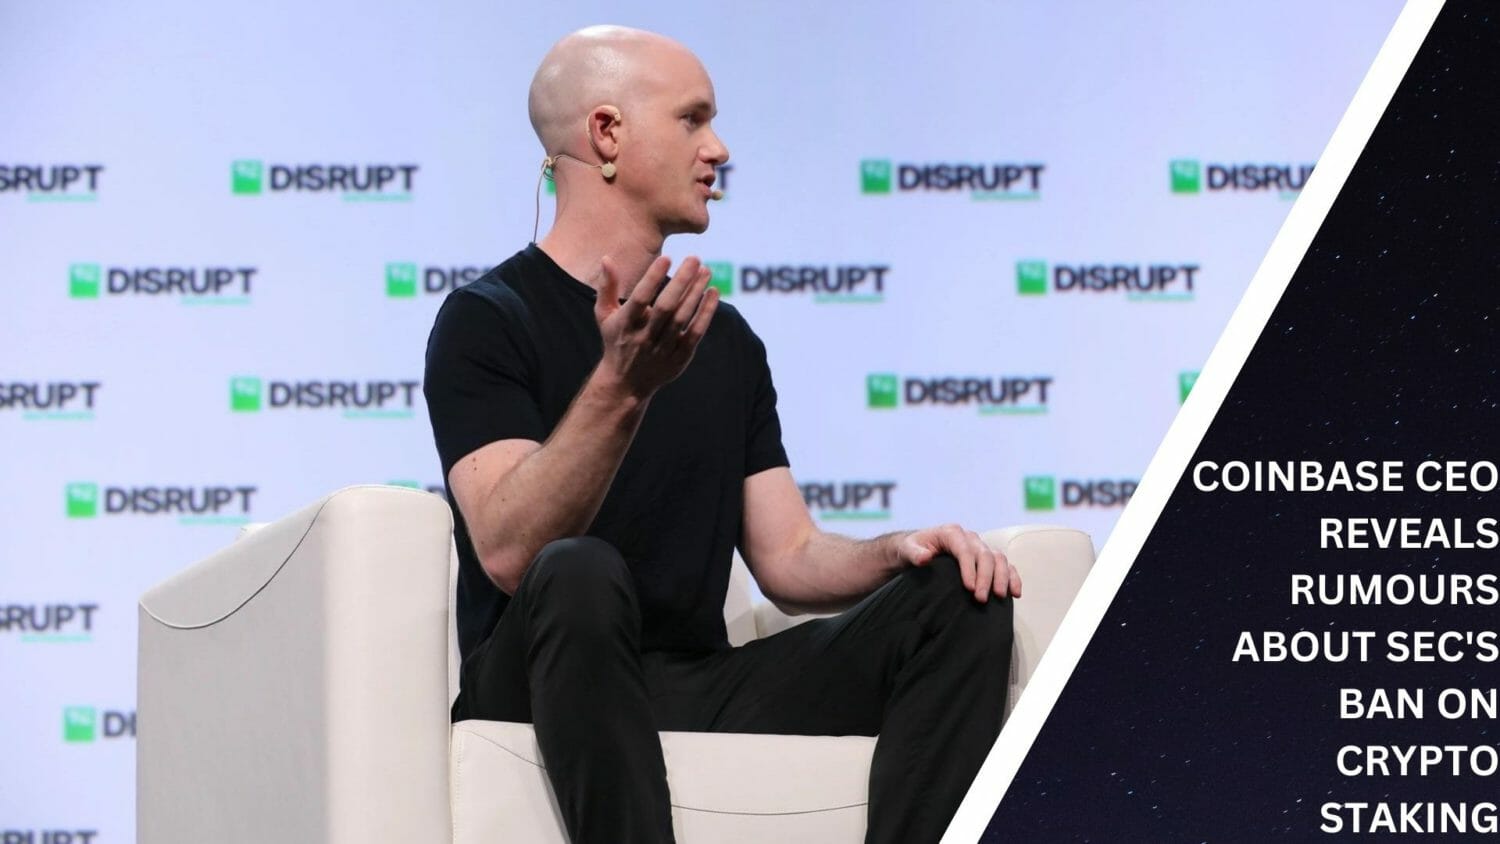 Coinbase Ceo Reveals Rumours About Sec'S Ban On Crypto Staking